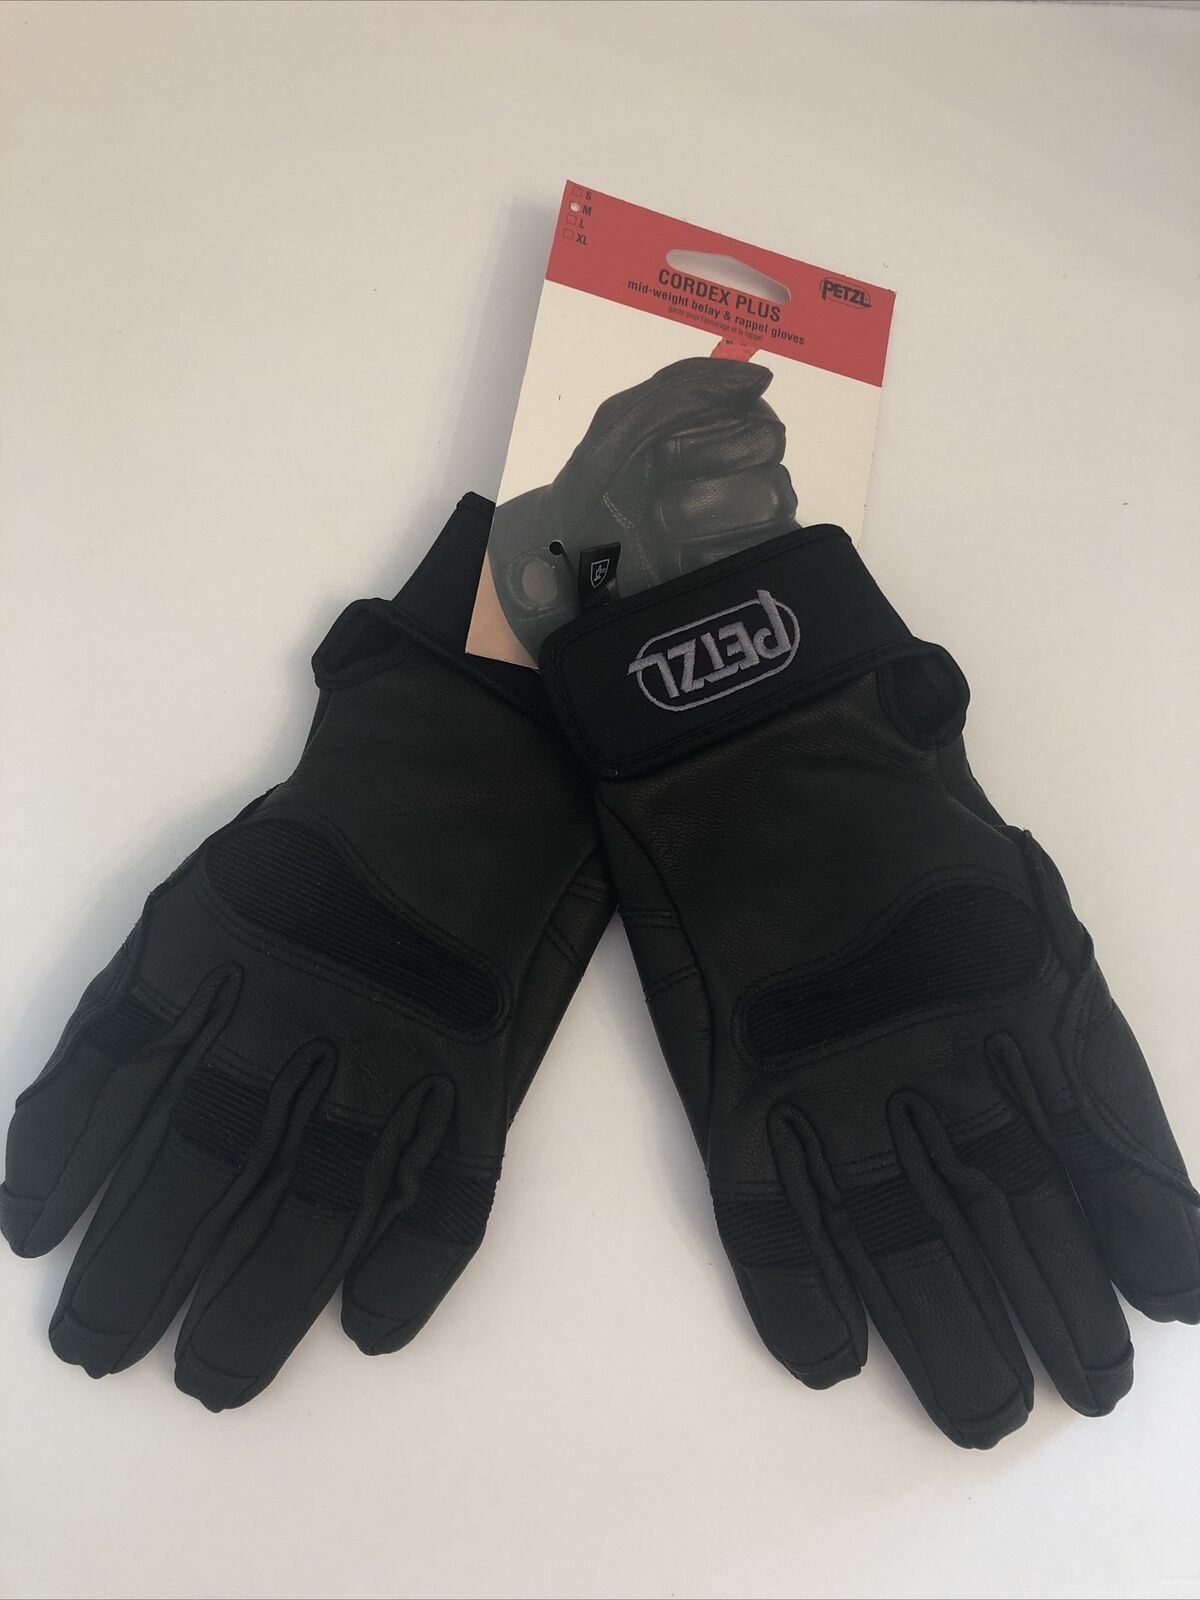 MWT PETXL CORDEX 2021 spring and summer new PLUS Gloves Max 59% OFF M Color Black Size